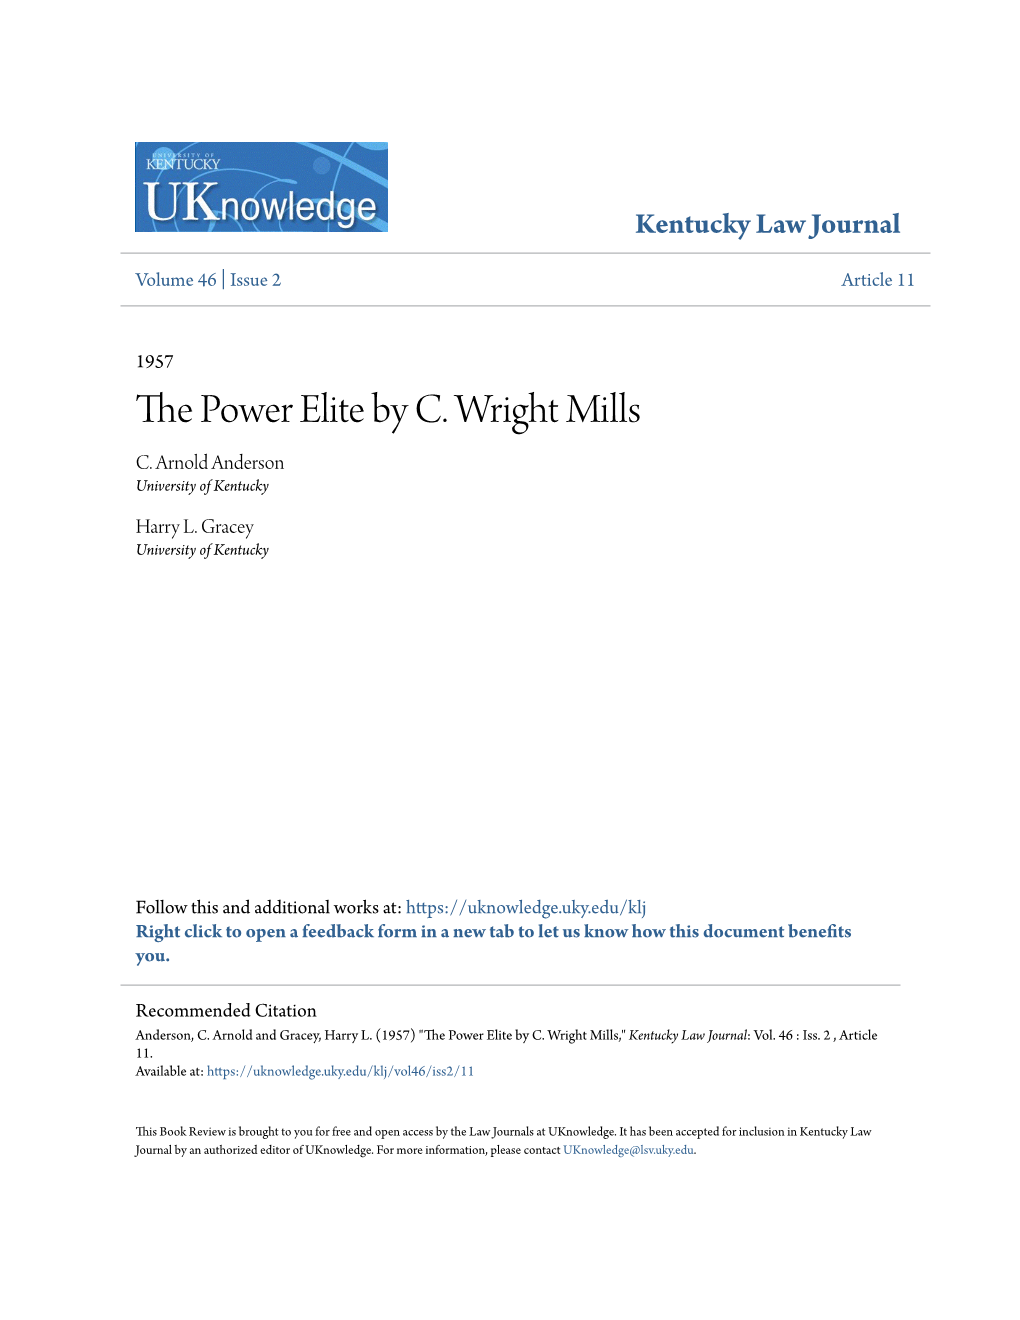 The Power Elite by C. Wright Mills